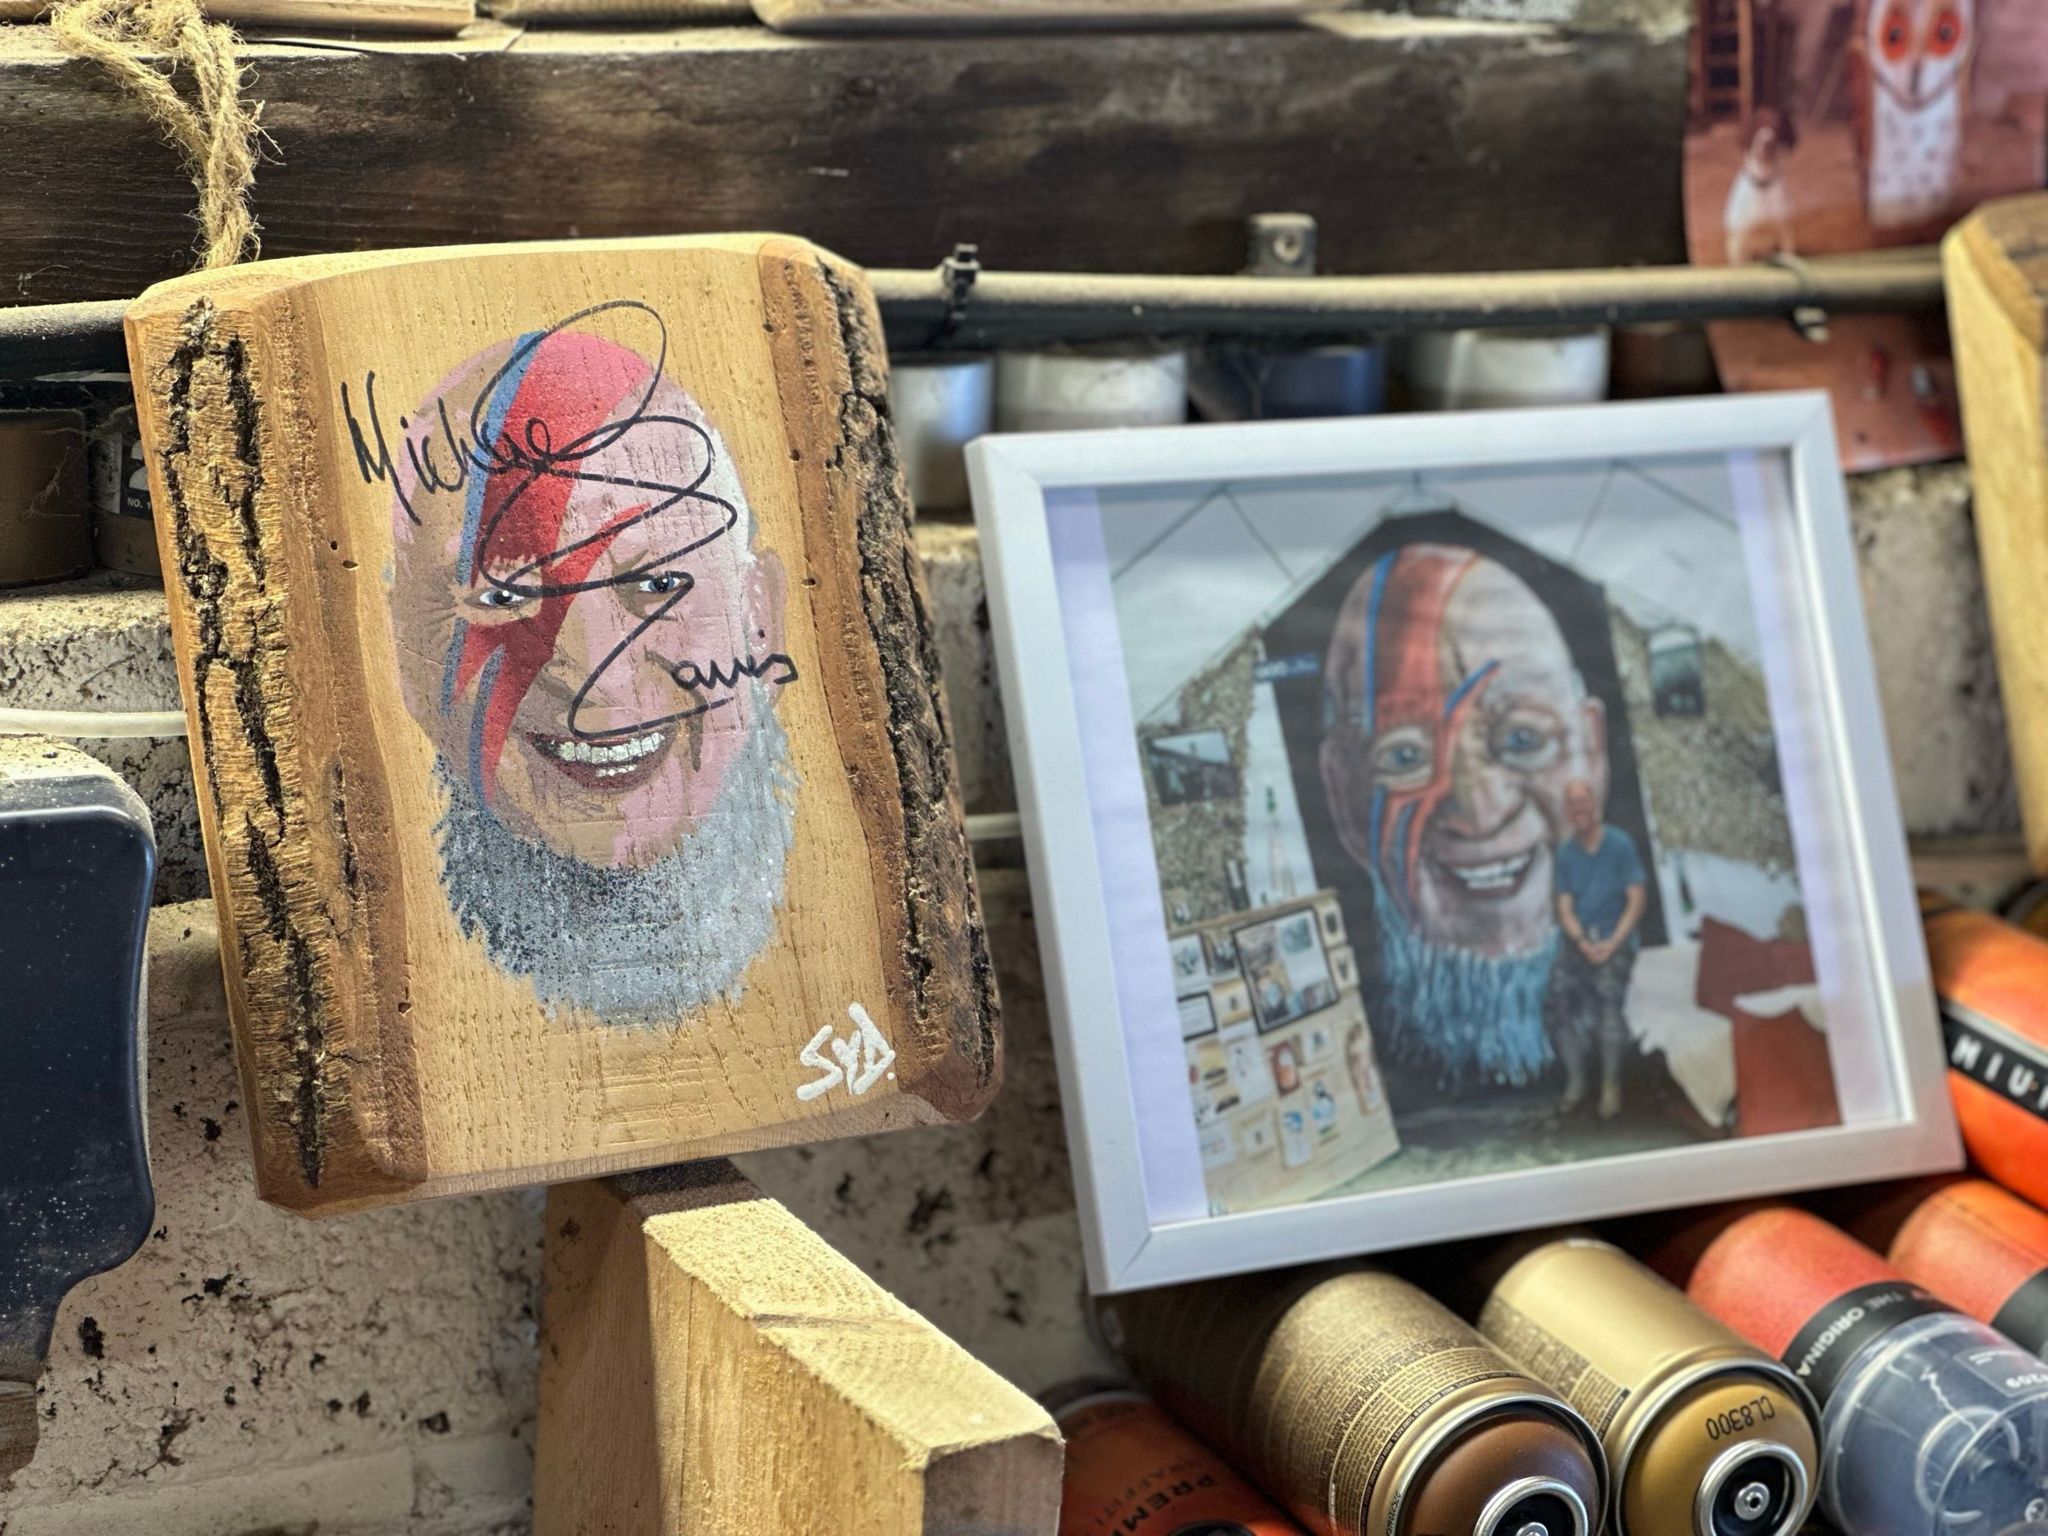 A wooden block with Michael Eavis' face, signed by him and a framed picture of the artist standing next to a large mural of the same image